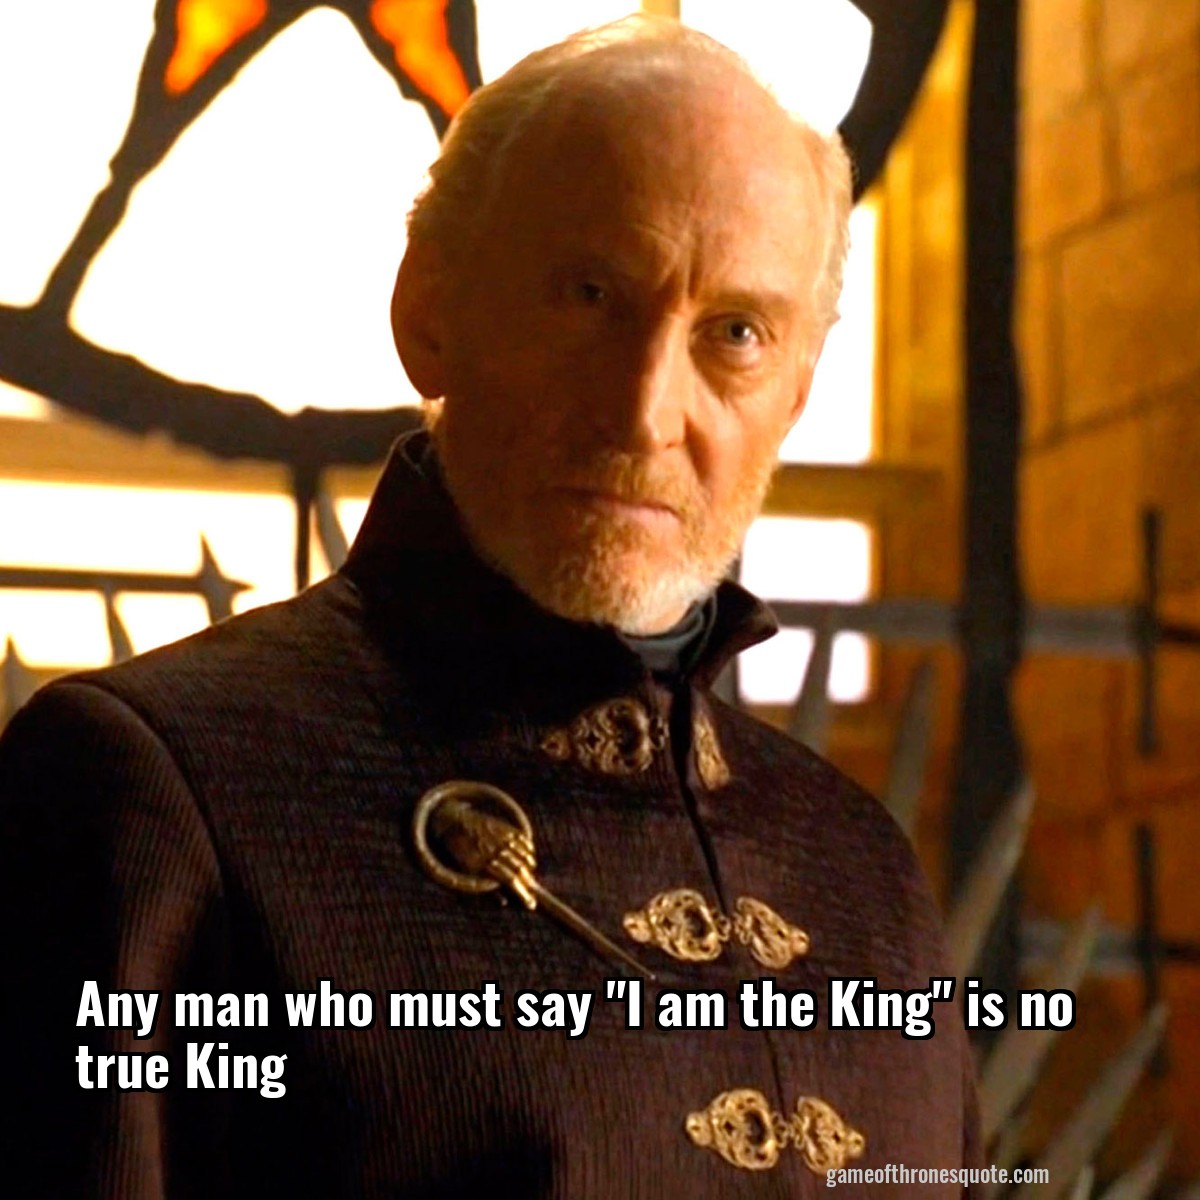 Any man who must say "I am the King" is no true King